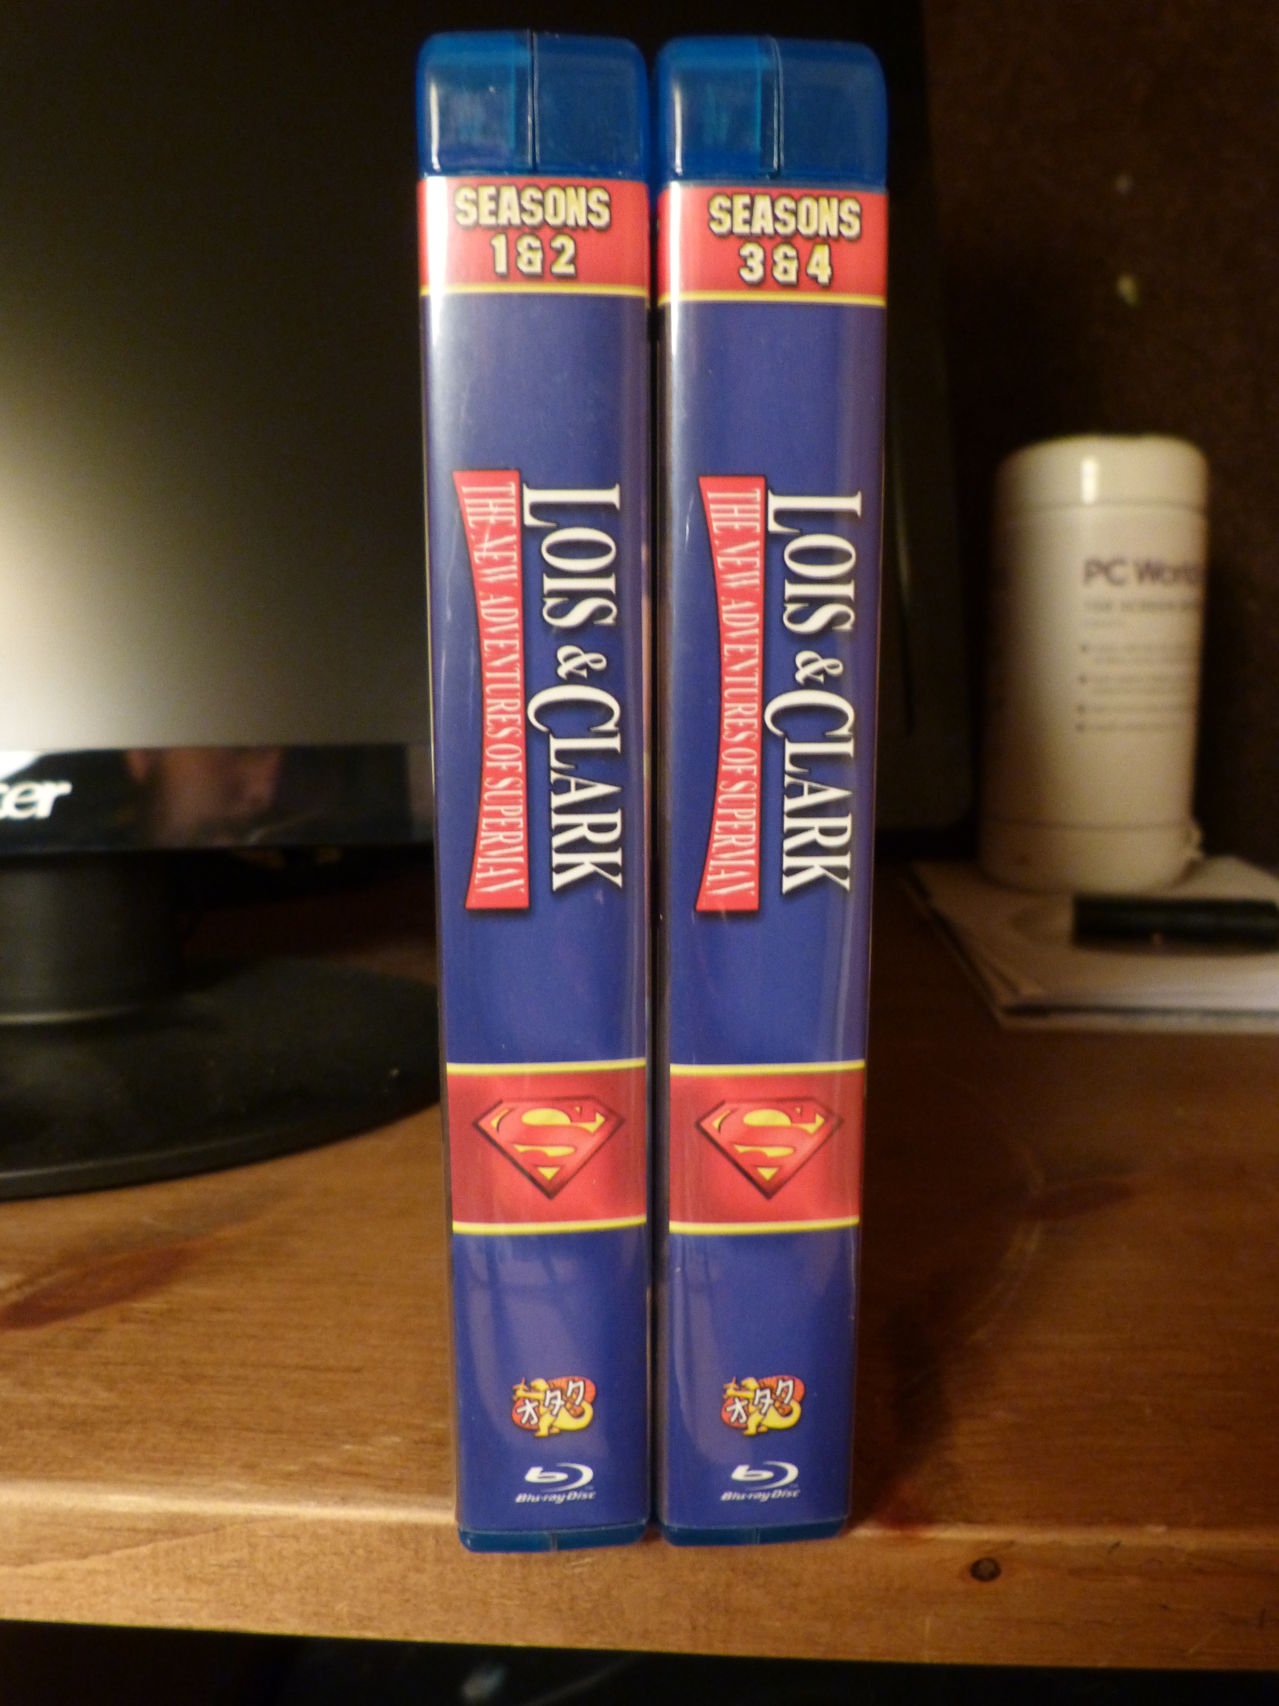 Lois & Clark (1993-1997), now out on Blu. Anyone else notice this? | Home  Theater Forum